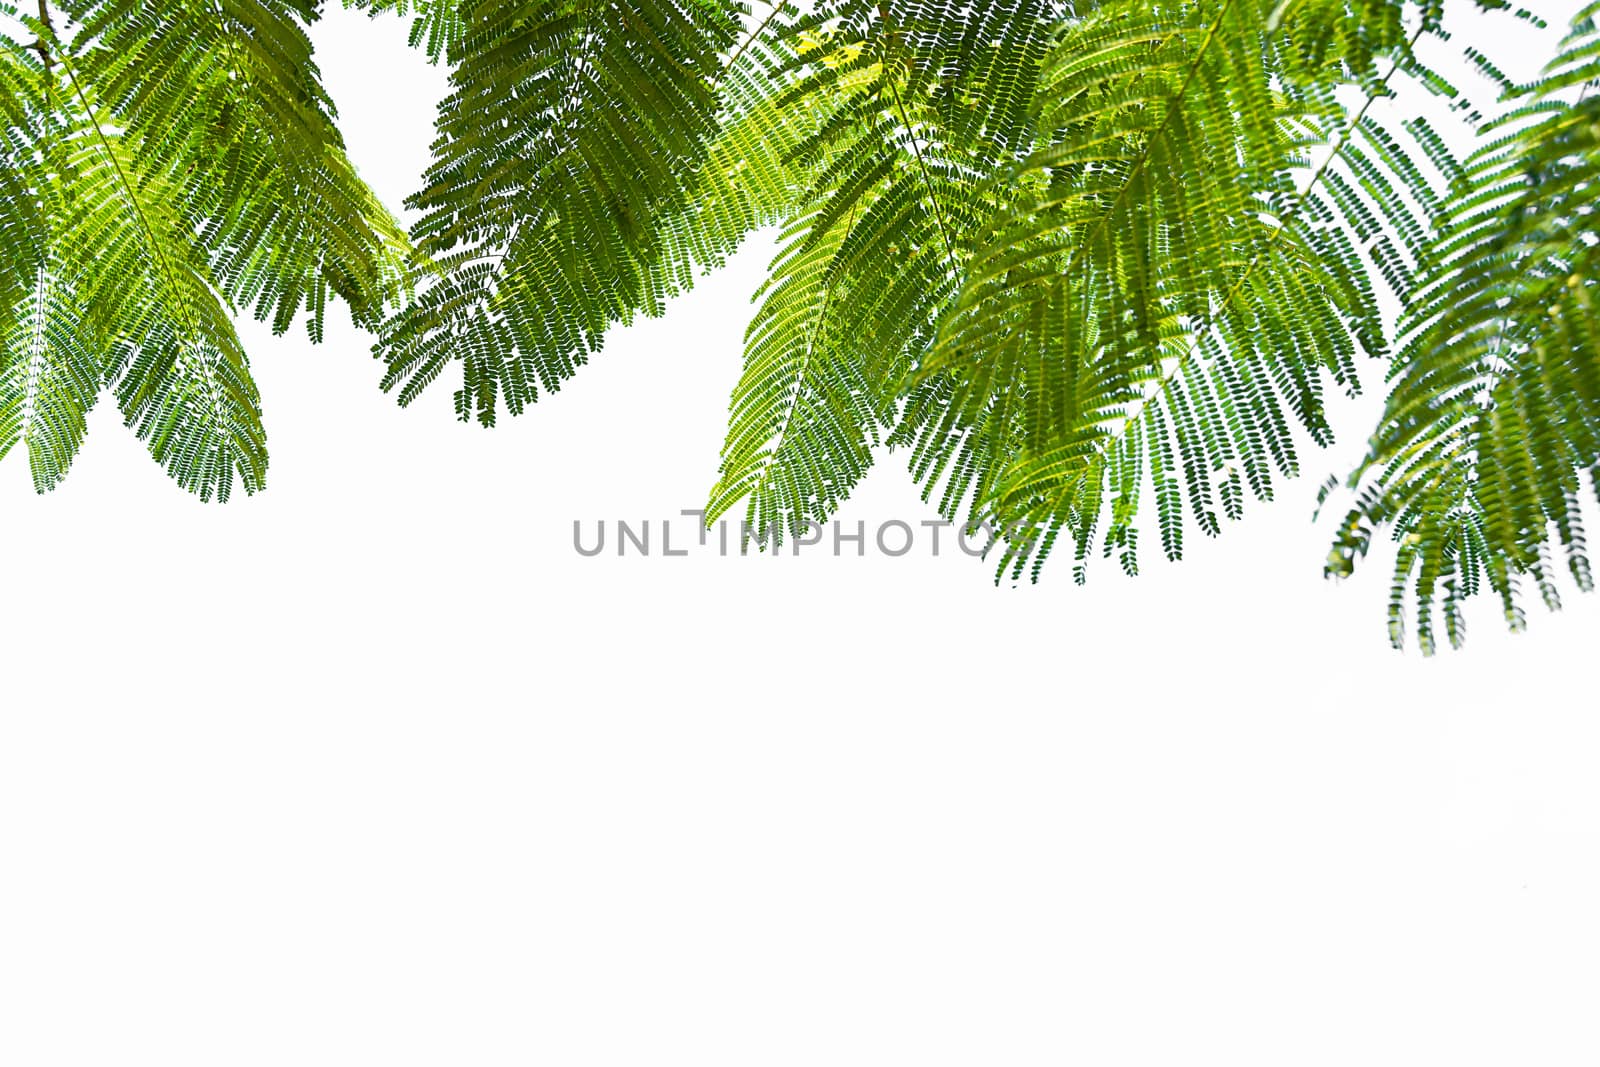 Green Leaf On The Branches Isolate On White Background.